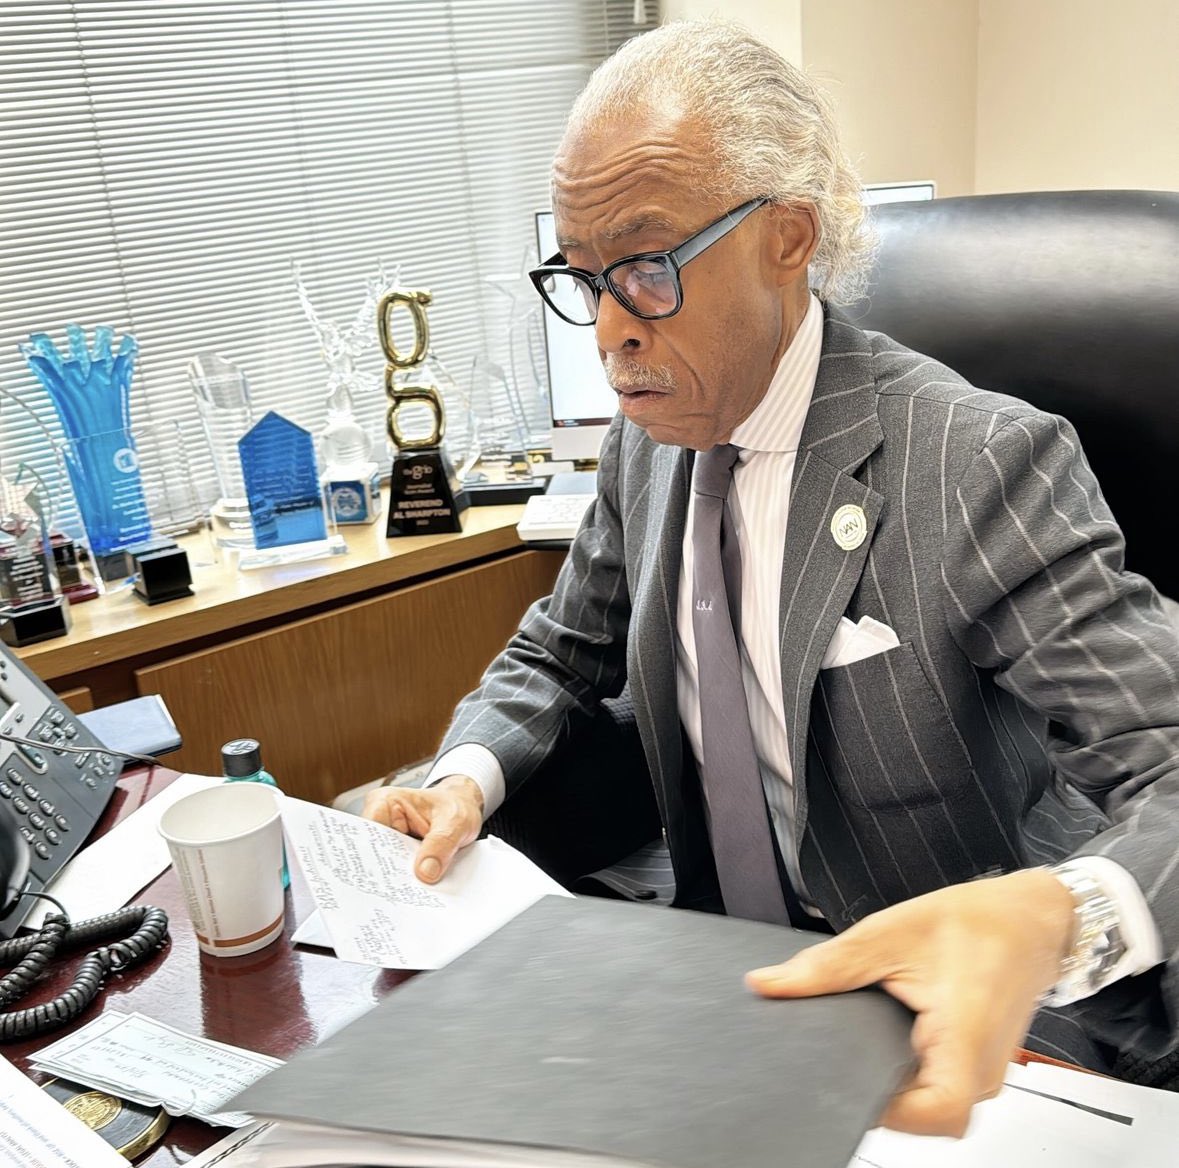 Live from NAN Corporate, Keeping it Real w/ Al Sharpton from 1-4 pm/et on local stations and SIRIUS XM 126. Call in at 8775325797. woldcnews.com/listen-live/